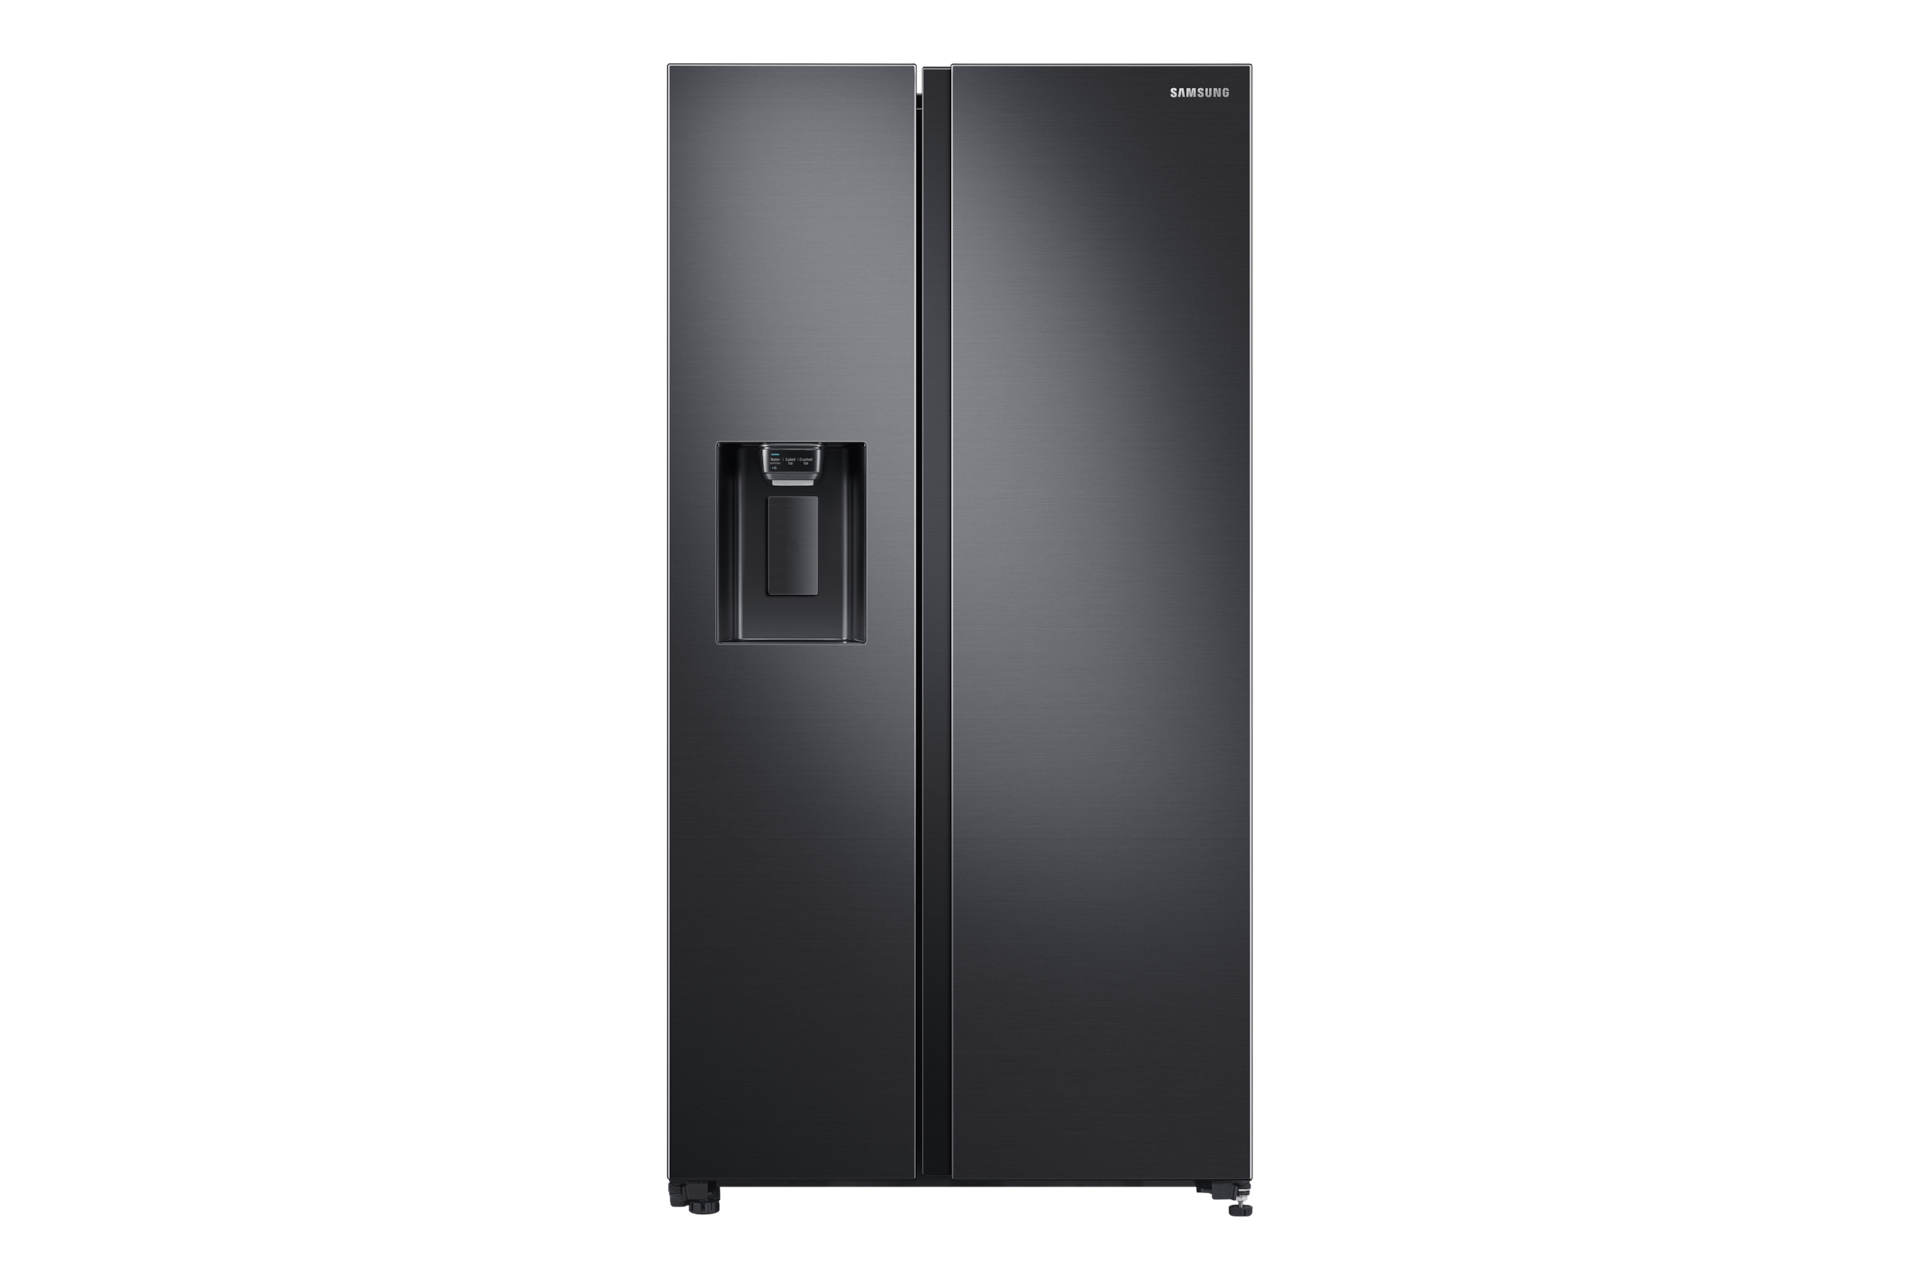 Front view of Samsung Side By Side with Ice and Water Dispenser Gentle Black Matte Refrigerator 23.9 Cu. Ft. (Black). Comes with stylish 2-door design.